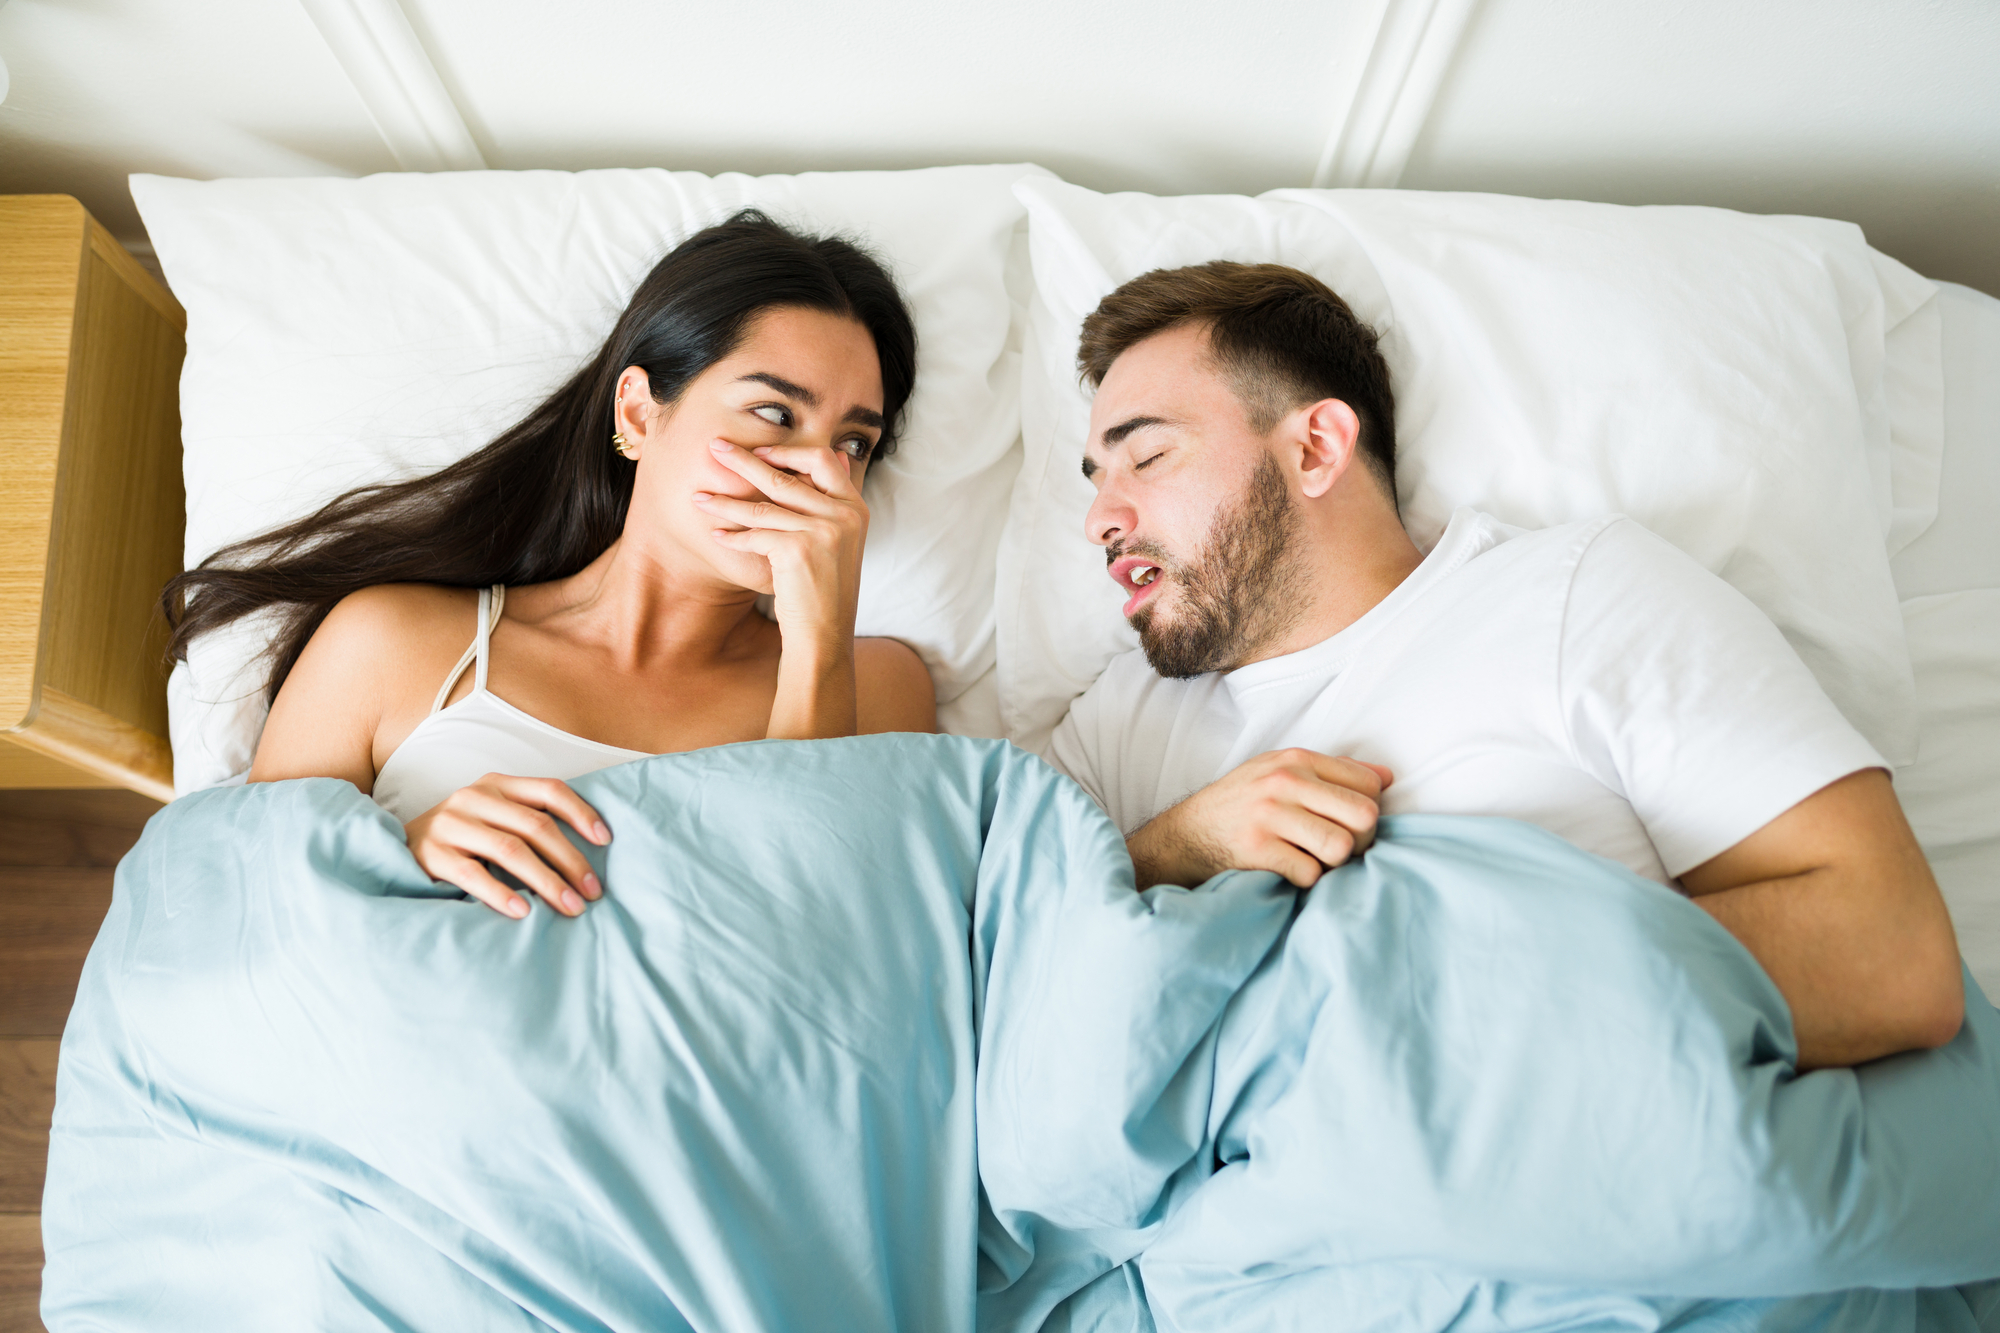 Woman smelling her partner's morning breath.